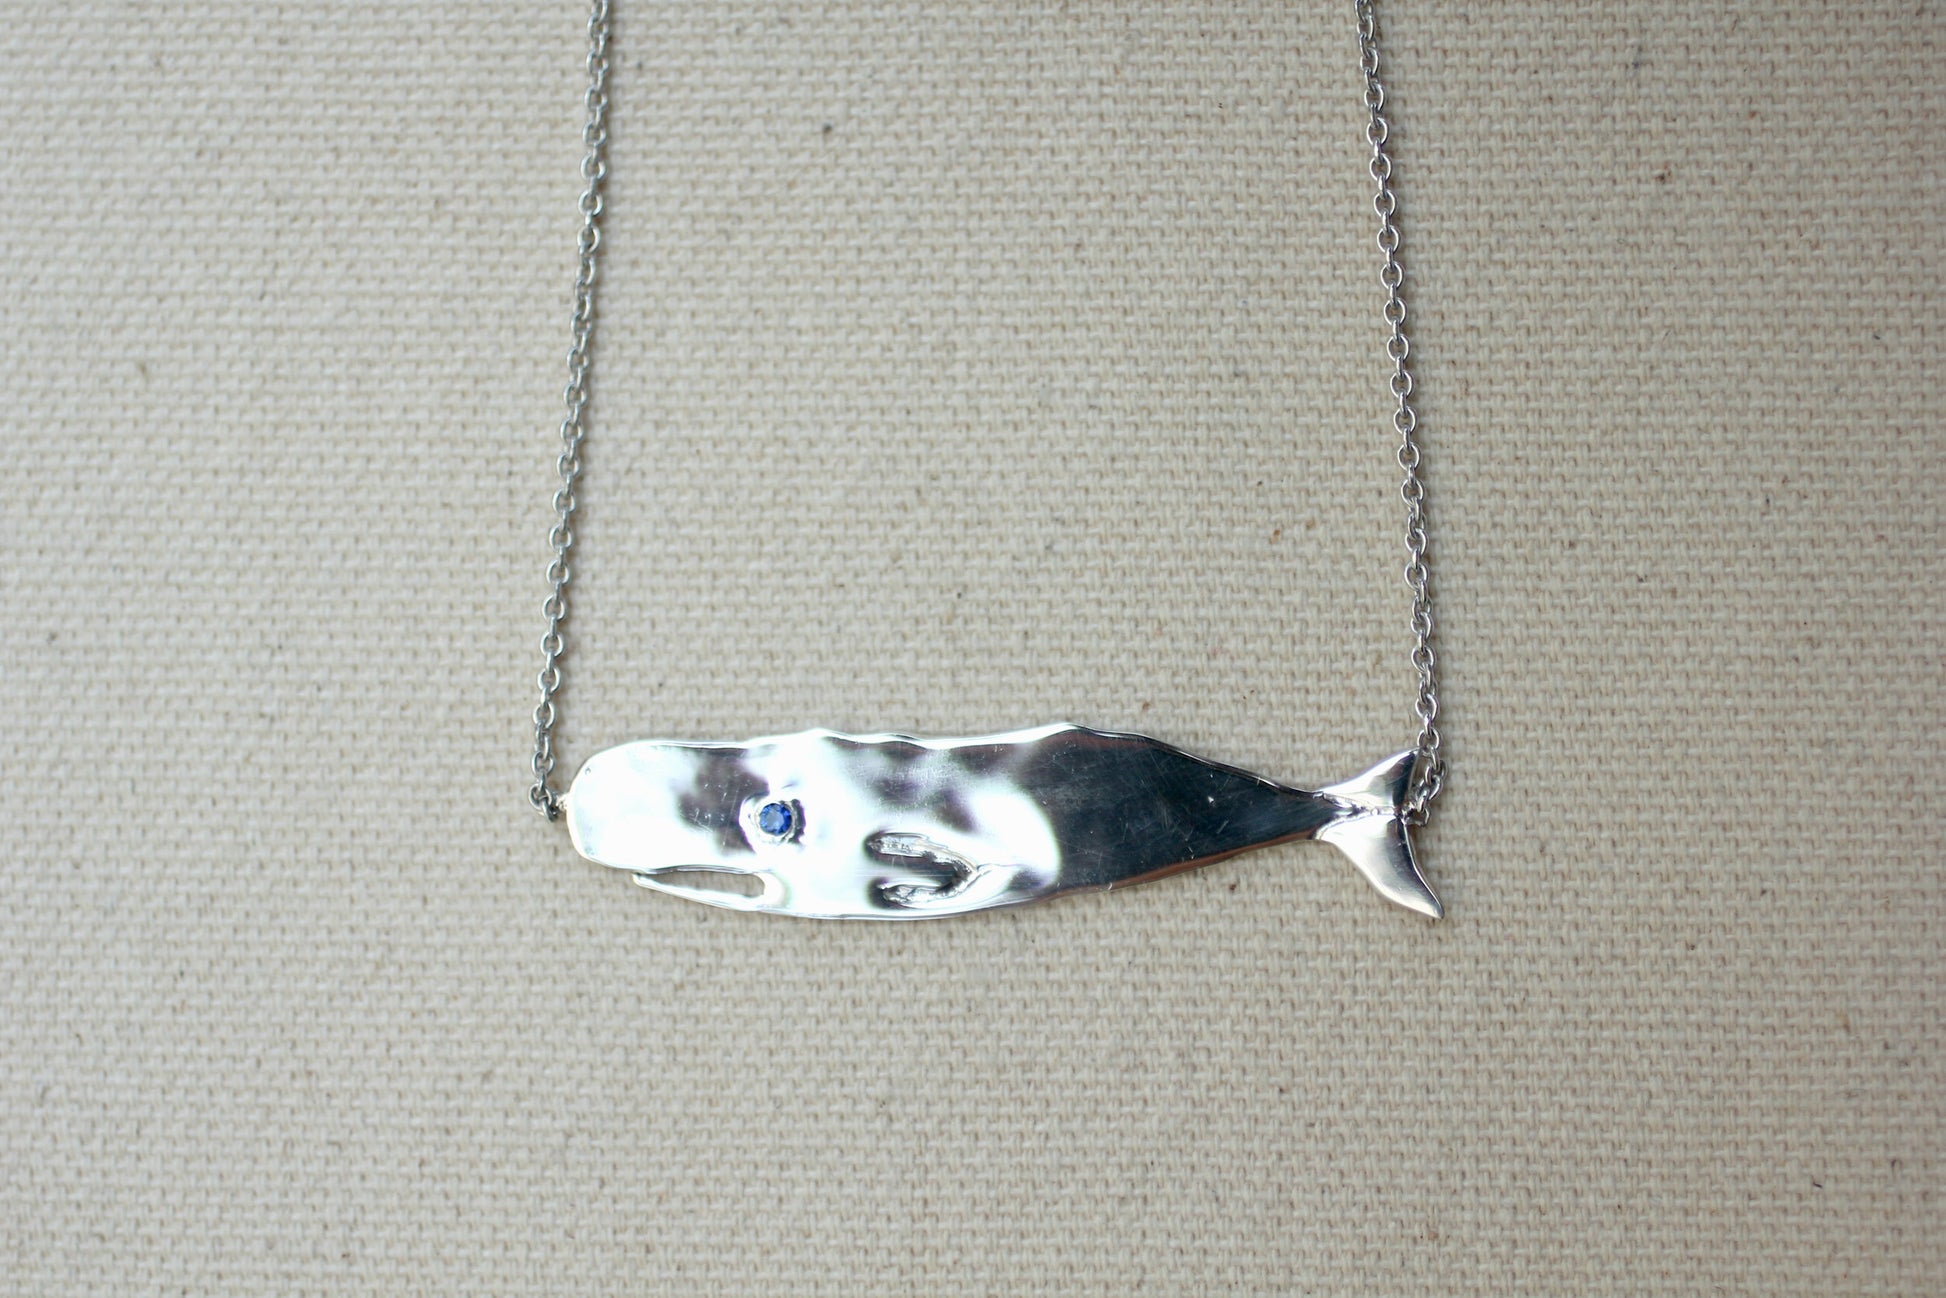 Sapphire and Sterling Silver Hand-Carved Flat Whale Necklace handmade by Jewel in the Sea Nantucket 